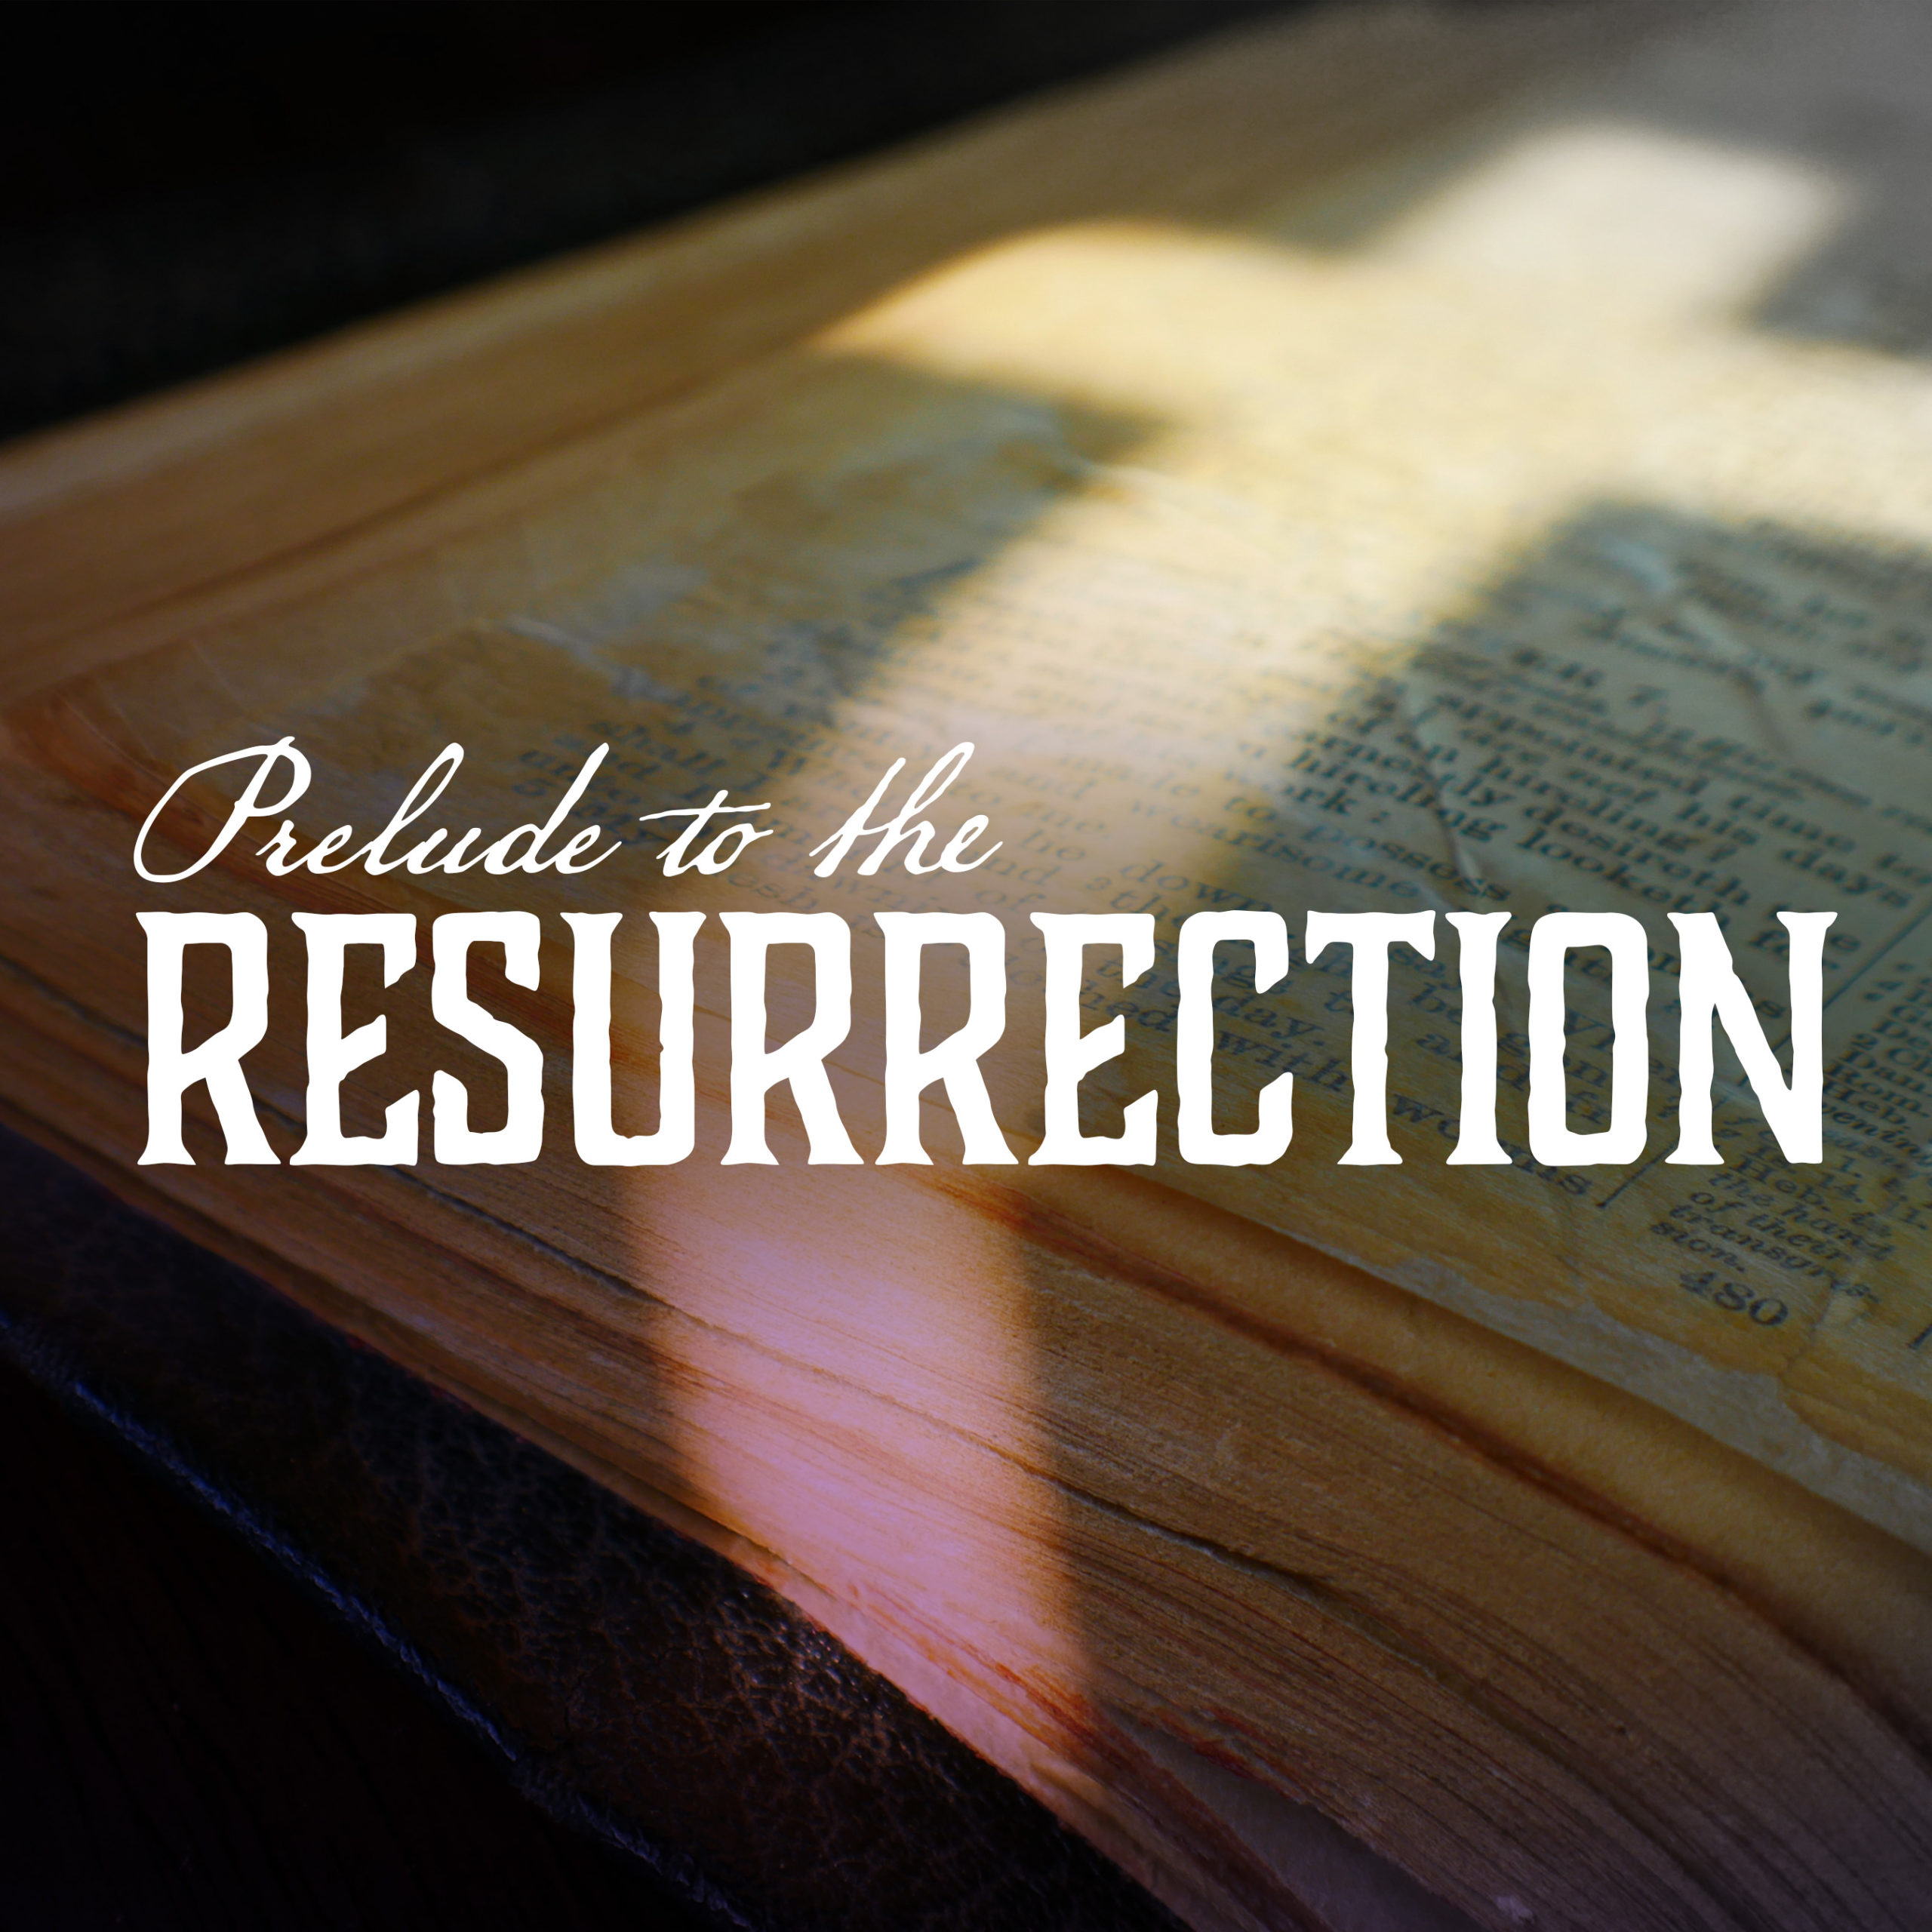 Prelude to the Resurrection